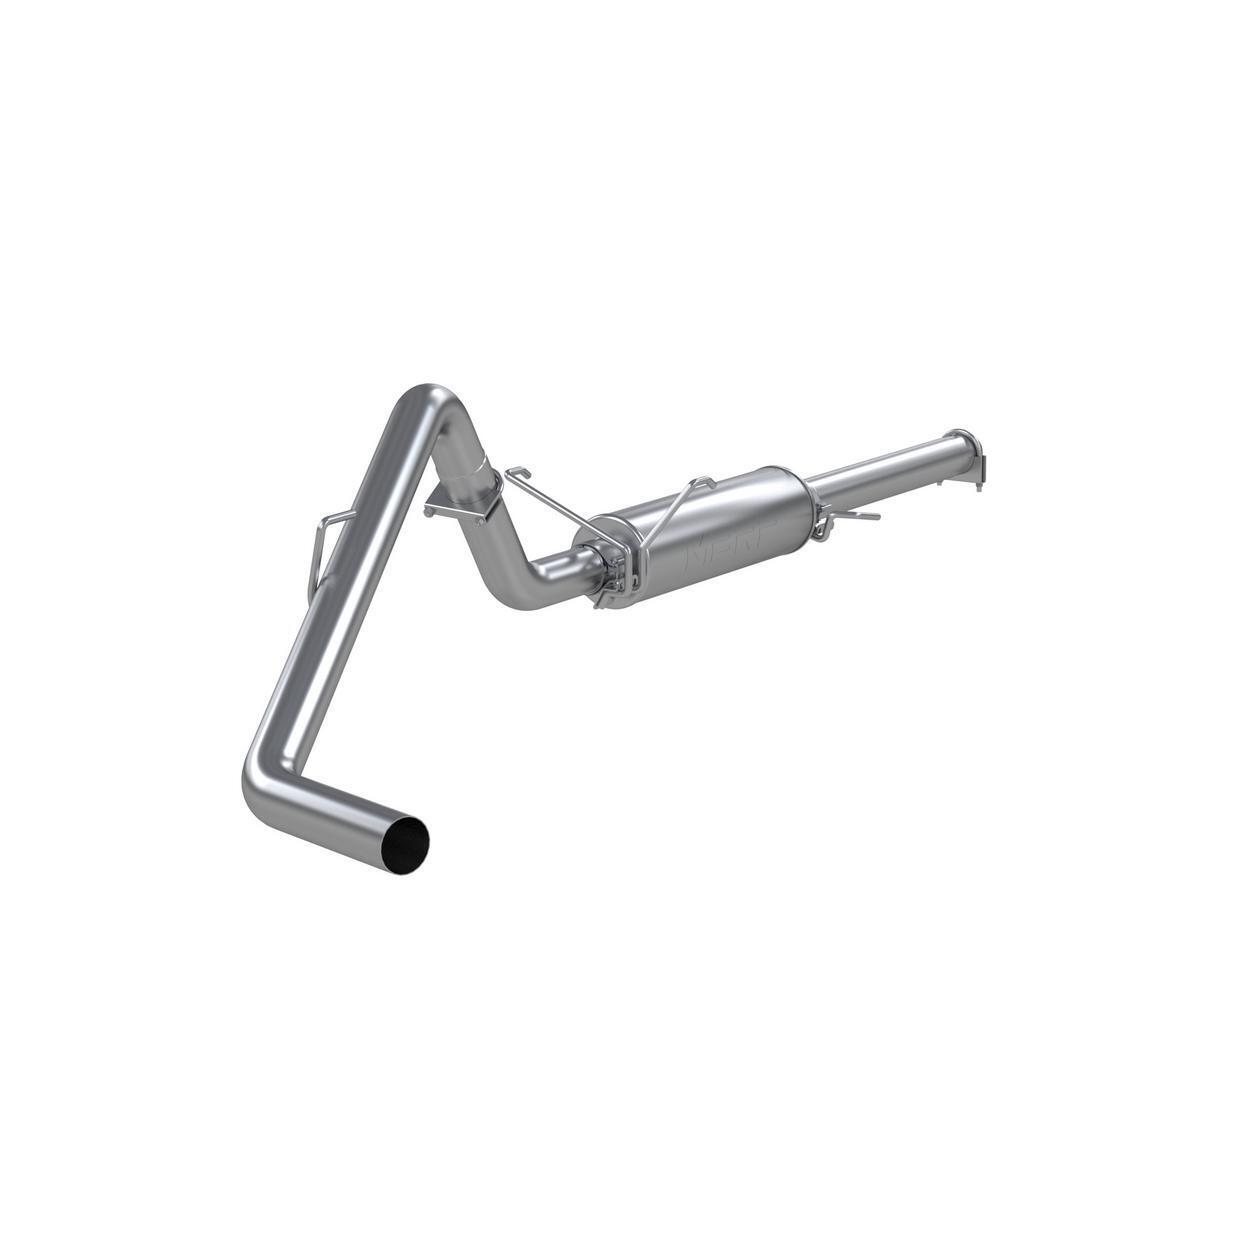 MBRP Exhaust S5104P-DL Exhaust System Kit for 2004 Dodge Ram 1500